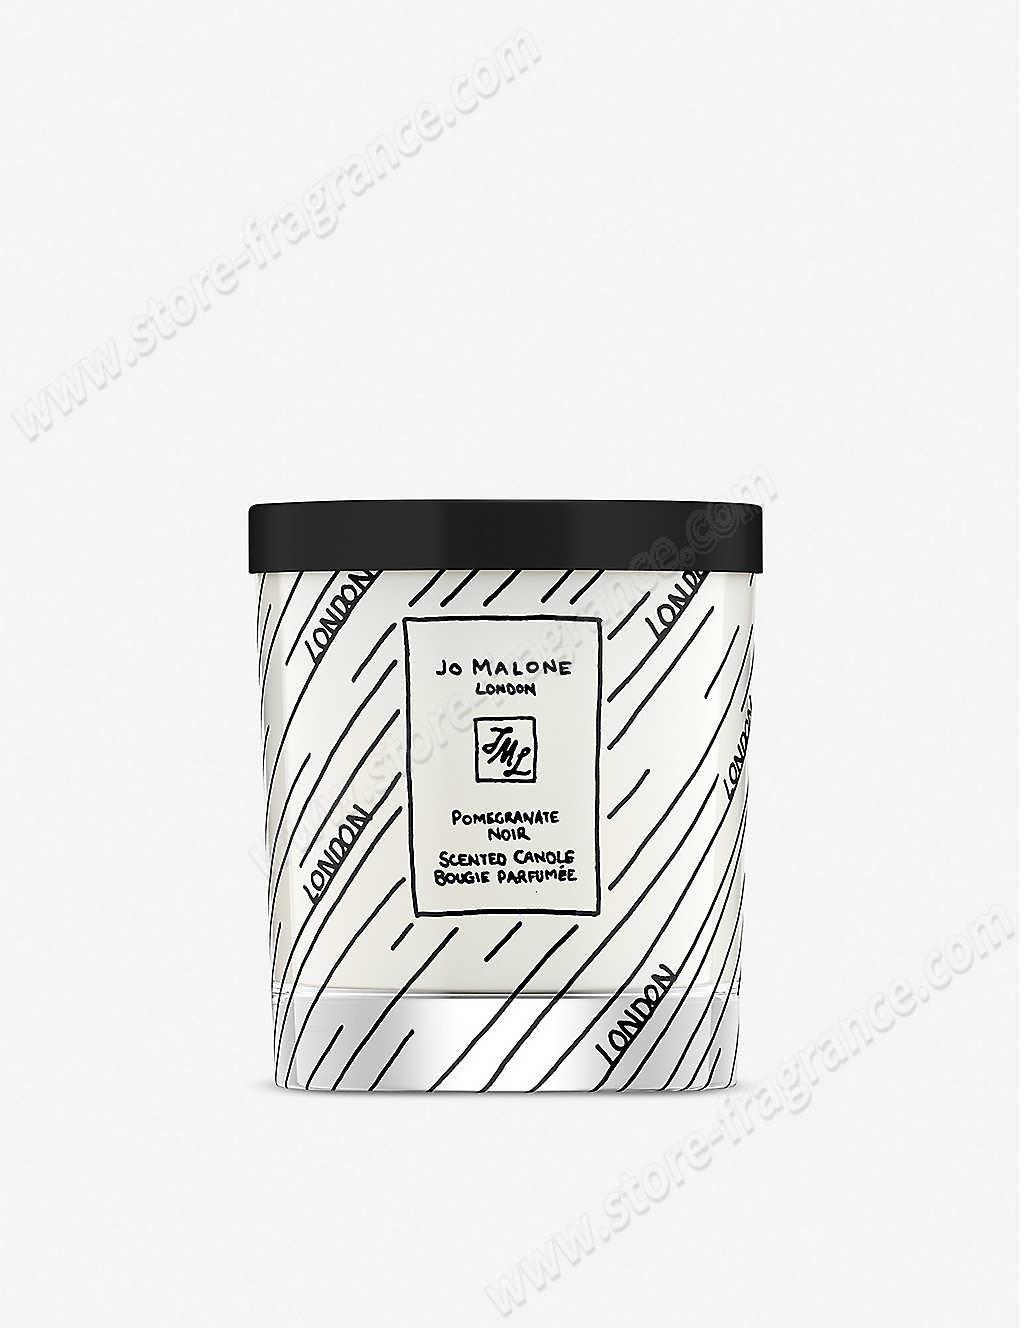 JO MALONE LONDON/Pomegranate Noir London Edition home candle 200g ✿ Discount Store - -1